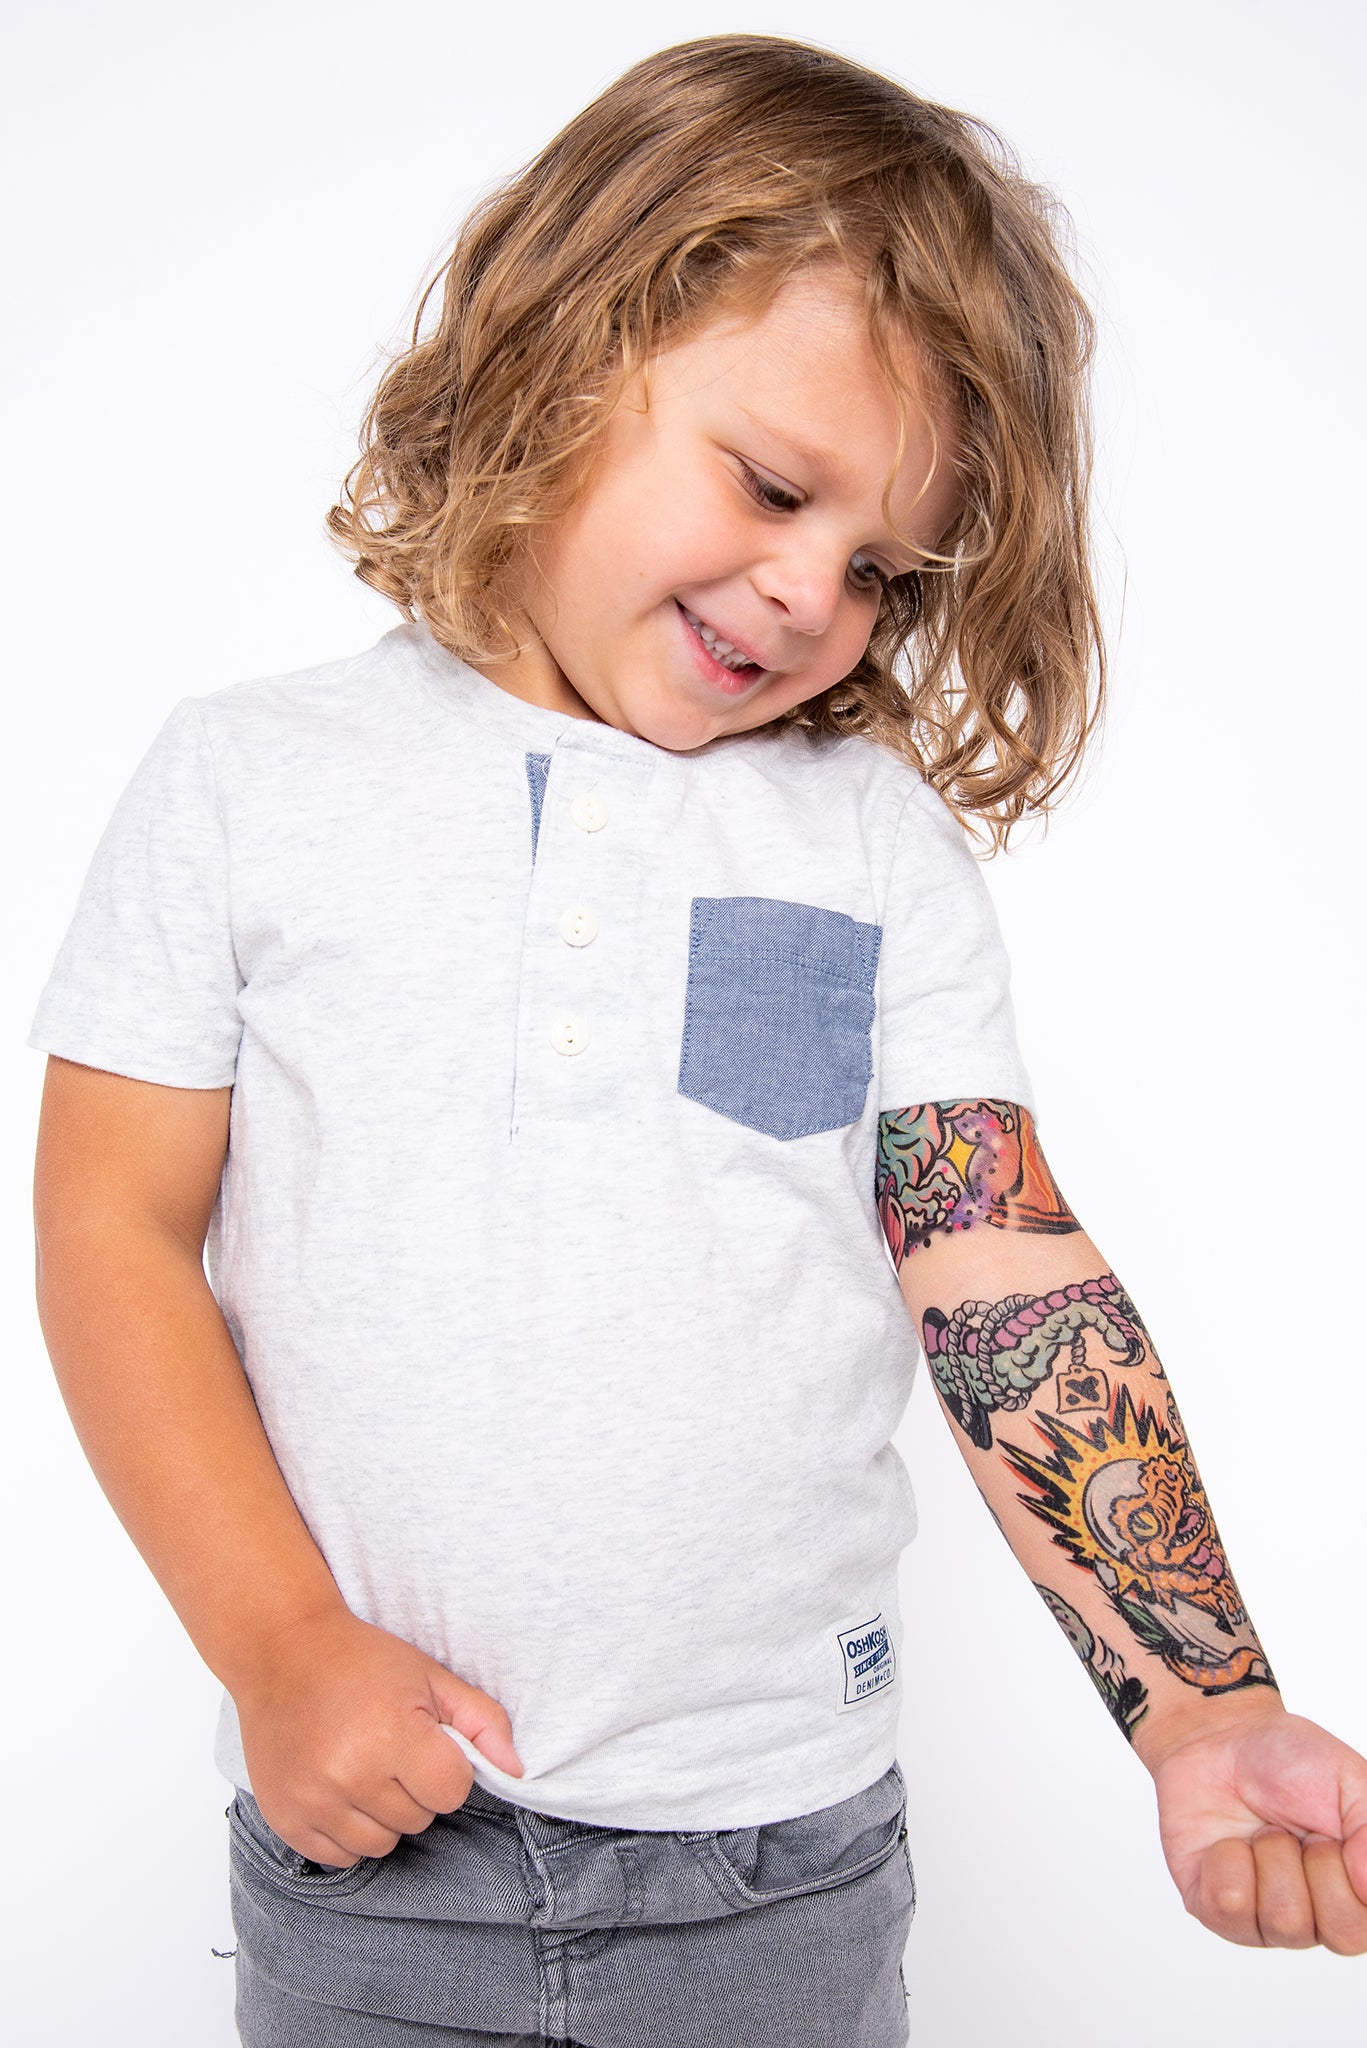 Rock A Statement With Creative Temporary Tattoos